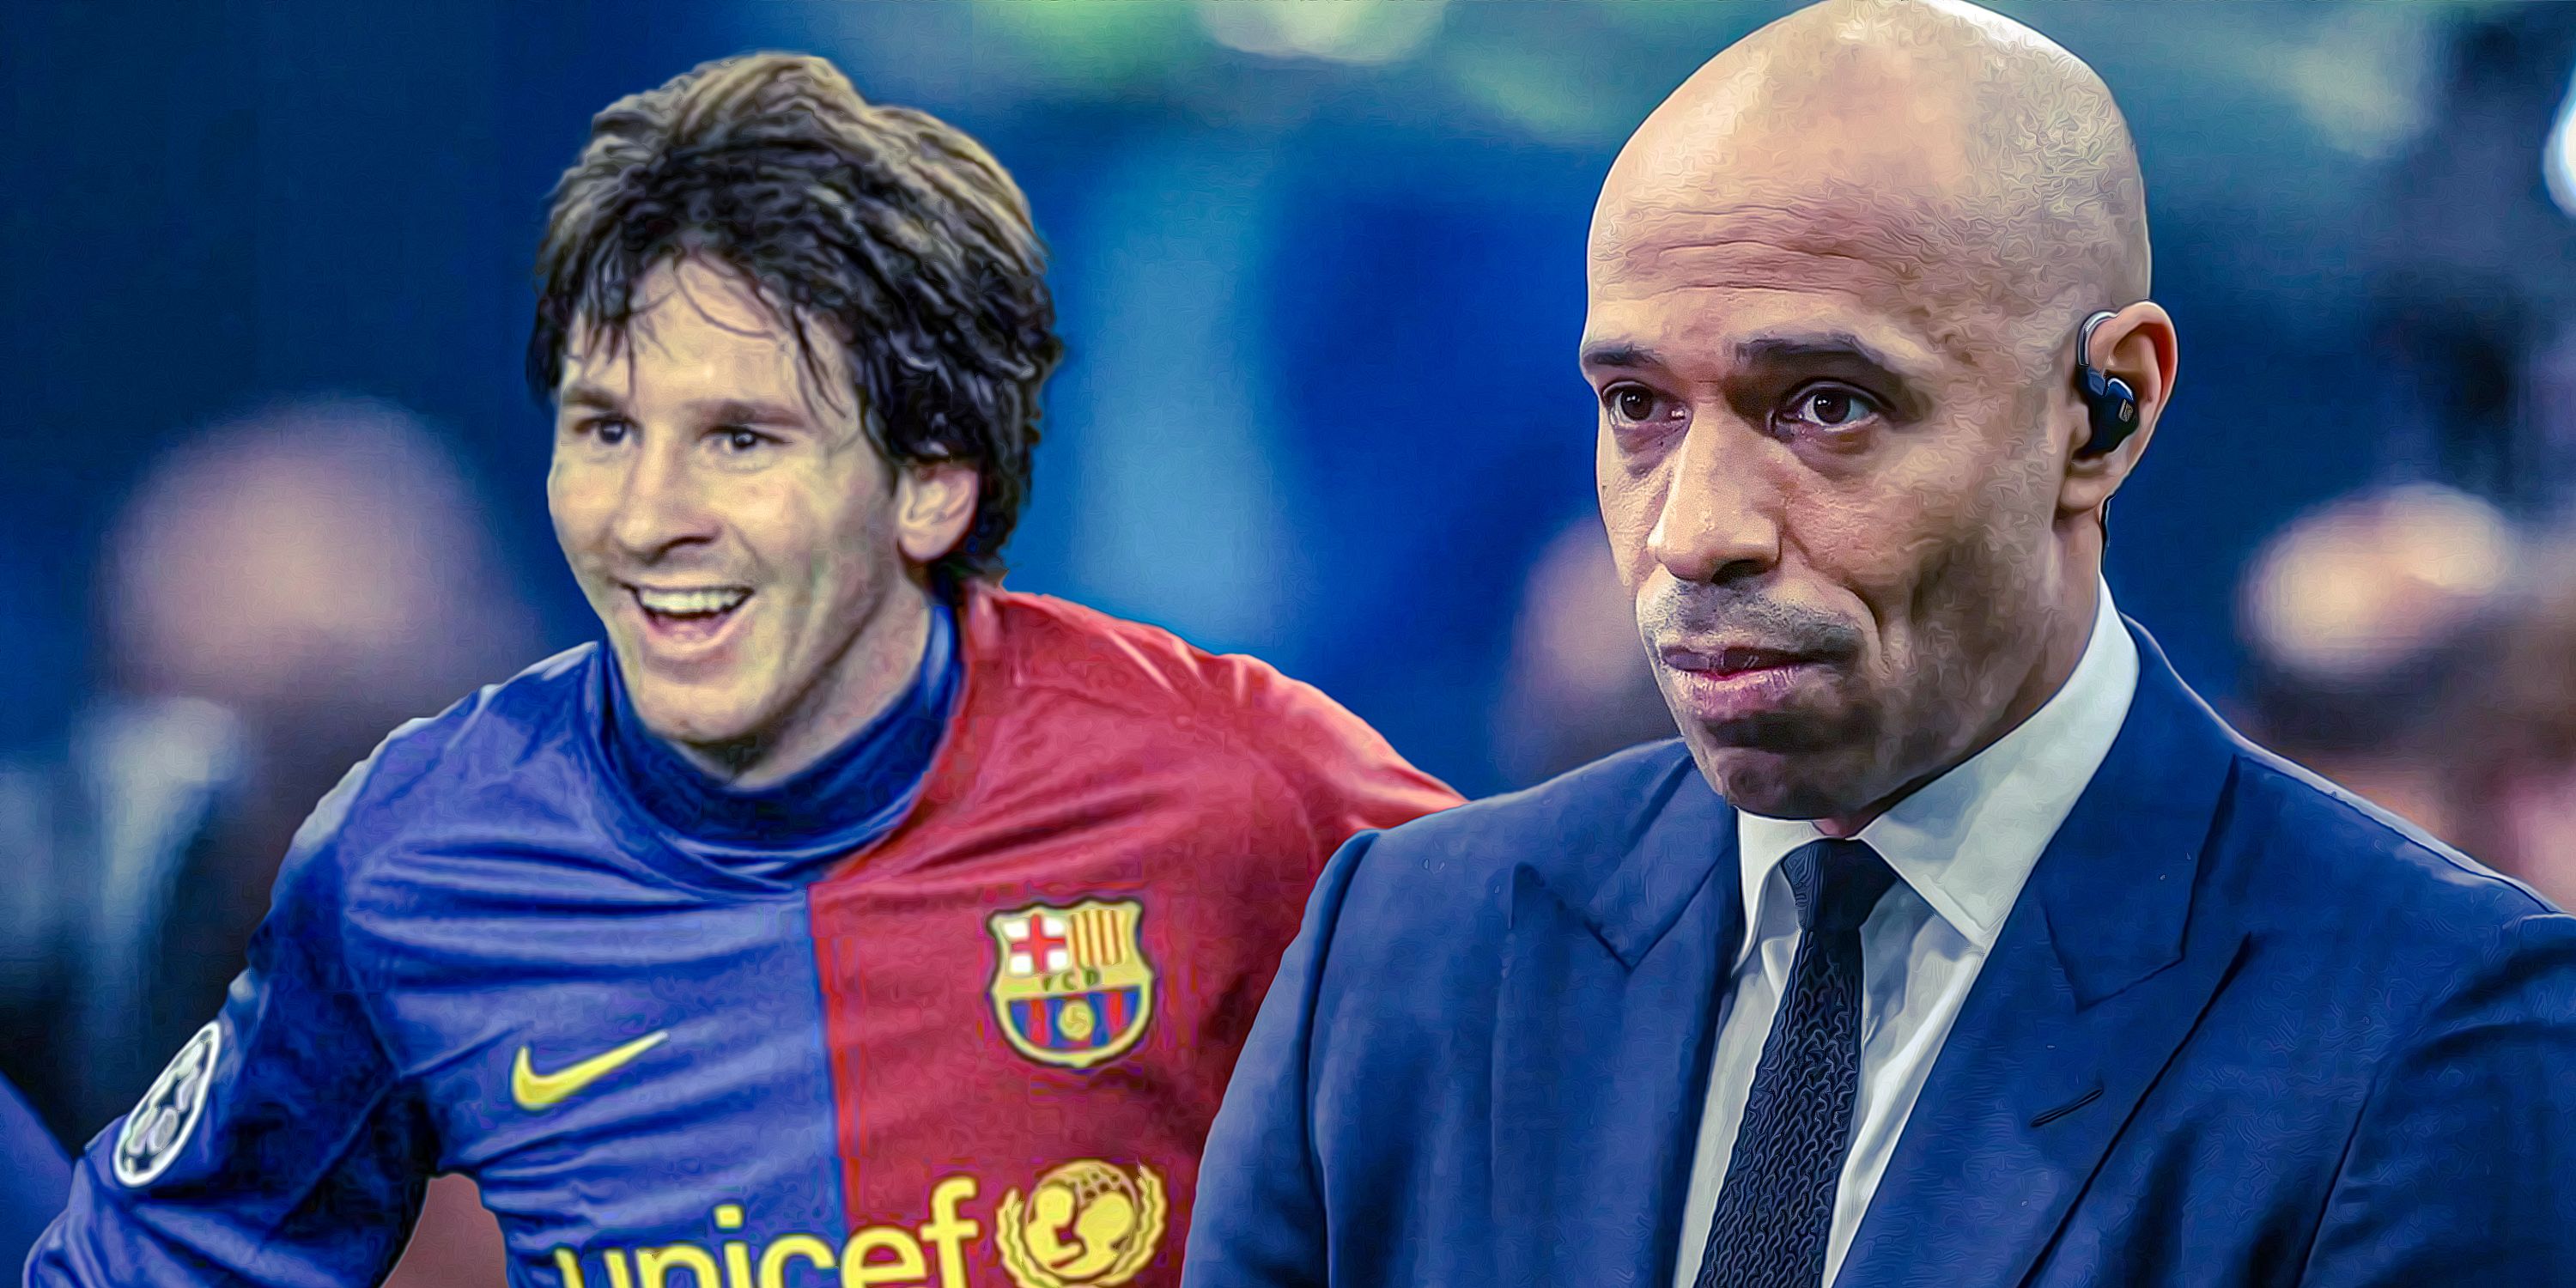 Lionel Messi’s Barcelona goal that Thierry Henry said ‘was not normal'